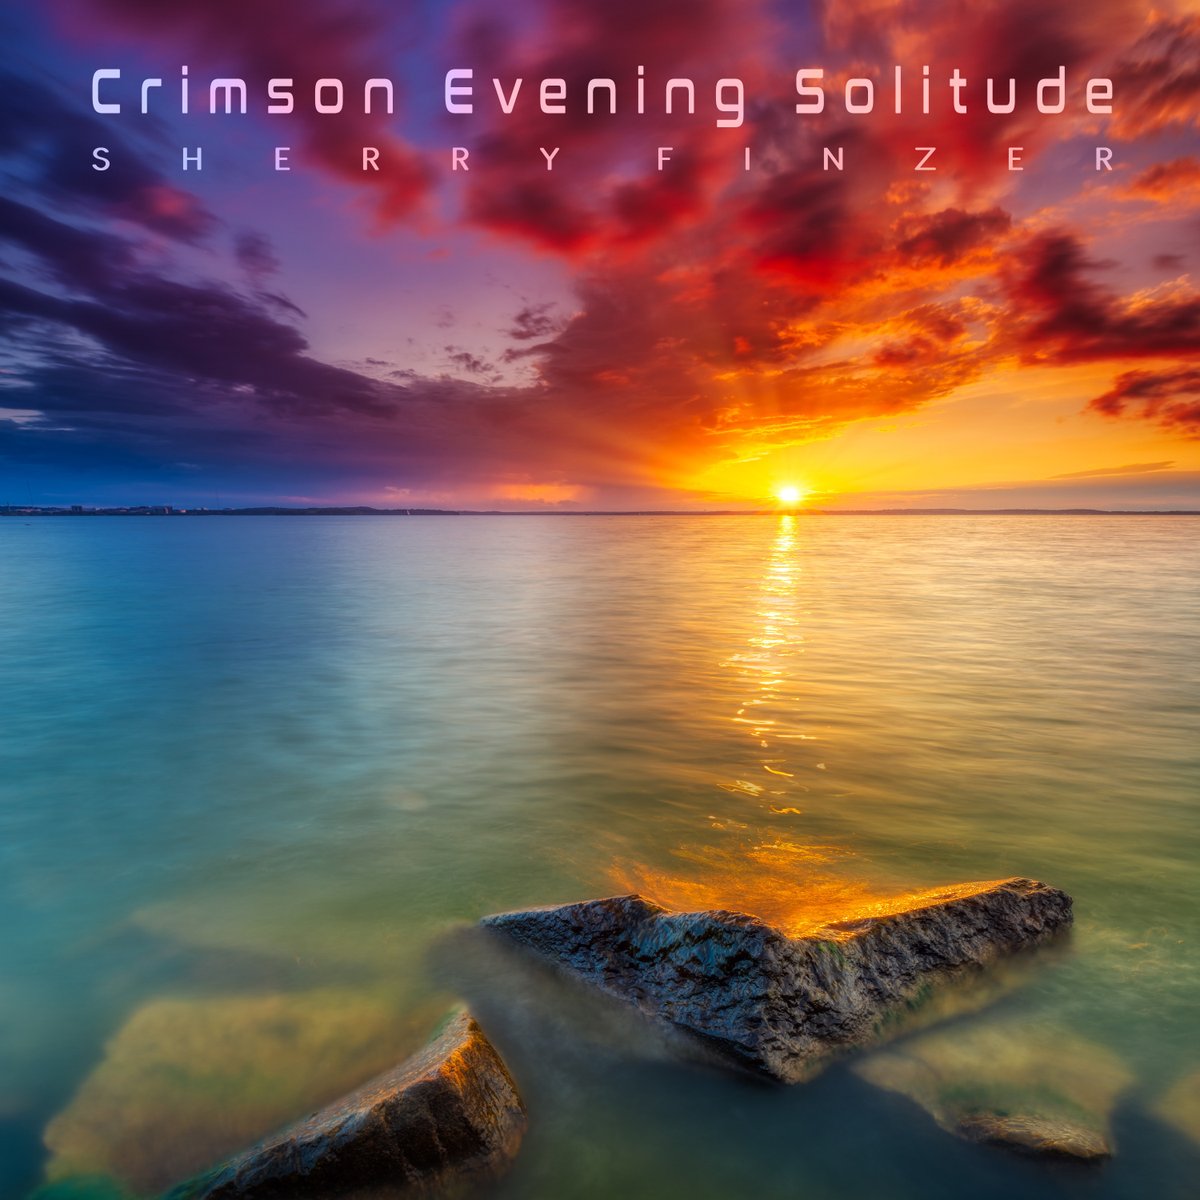 Wishing everyone a beautiful Friday! If you are looking for a nice tune for your evening sunset check out my track just released today titled Crimson Evening Solitude! songwhip.com/sherry-finzer/…